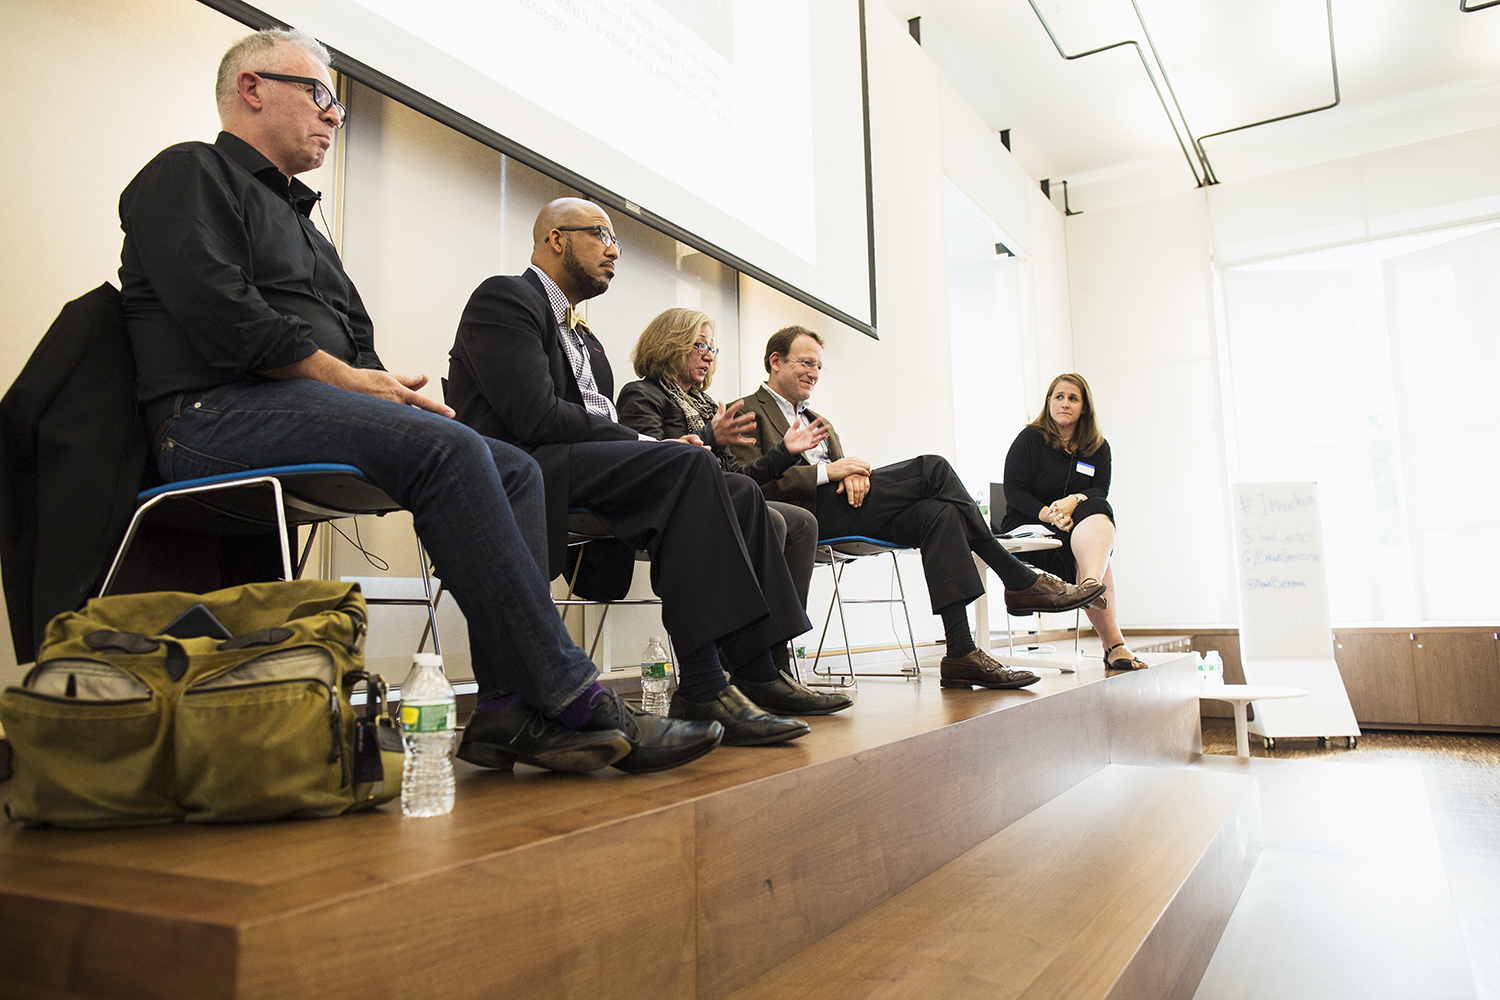  "The Press and Photography" panel, with Aidan Sullivan (Getty Images), Kenny Irby (Poynter Institute), Michele McNally (NY Times), Santiago Lyon (Associated Press), and moderator Claire Wardle, Columbia Journalism School, NY, NY, October 16, 2015 